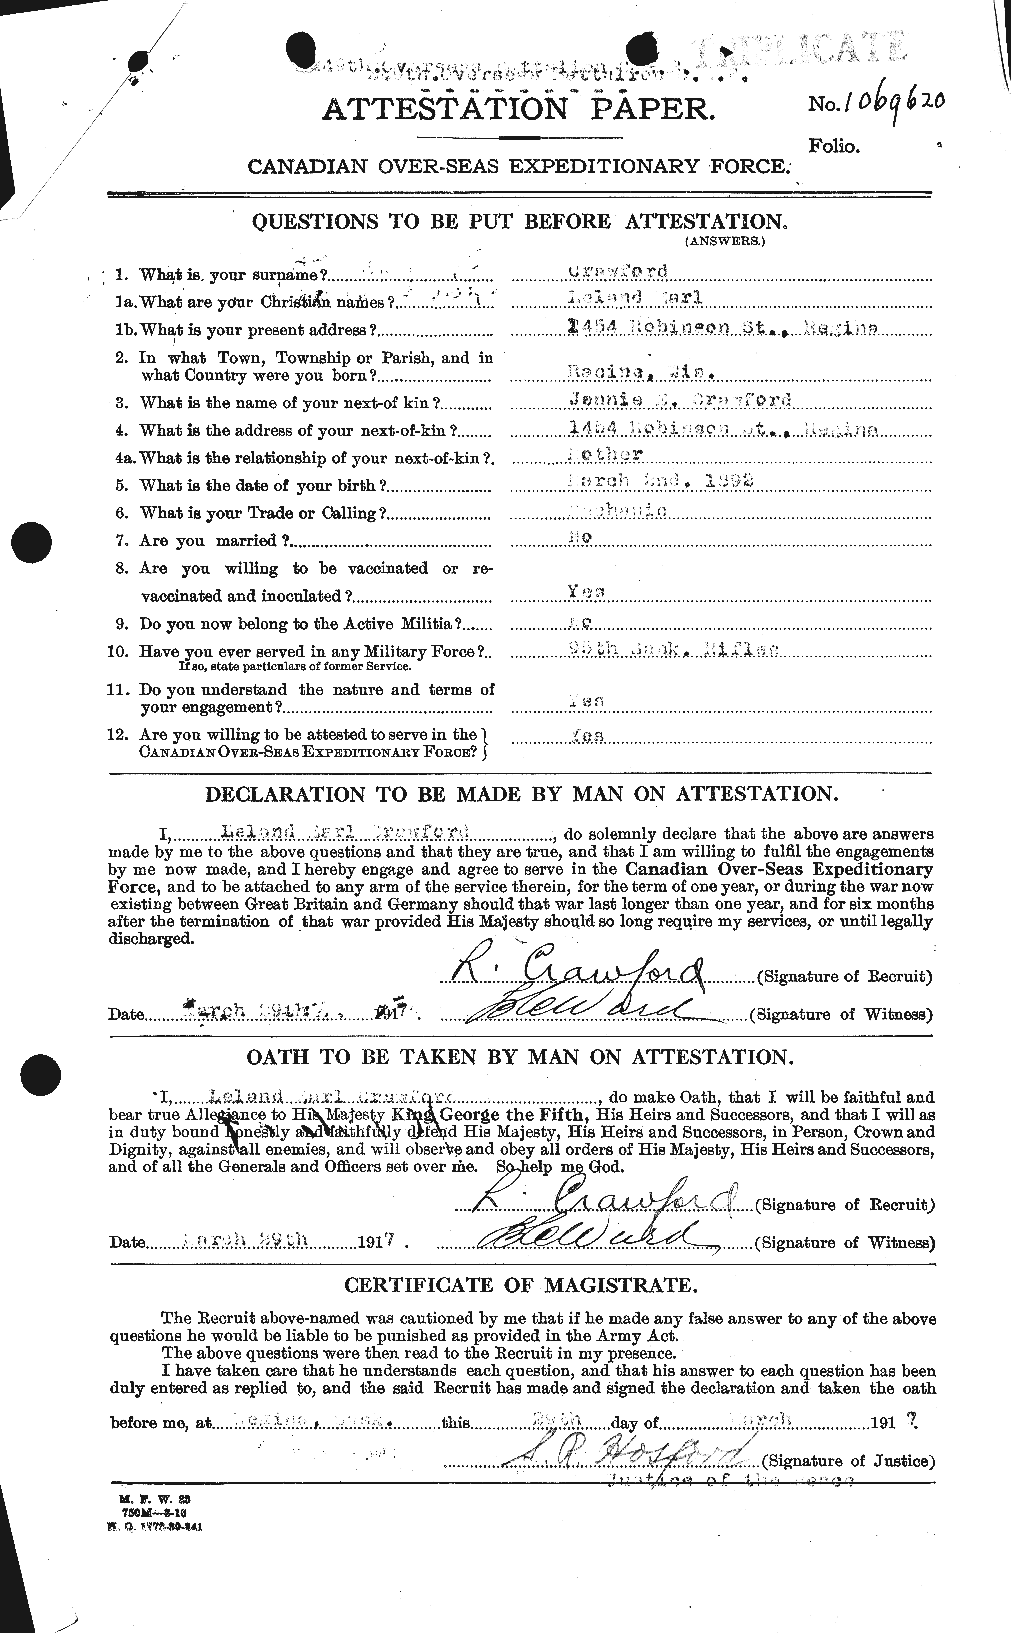 Personnel Records of the First World War - CEF 061800a